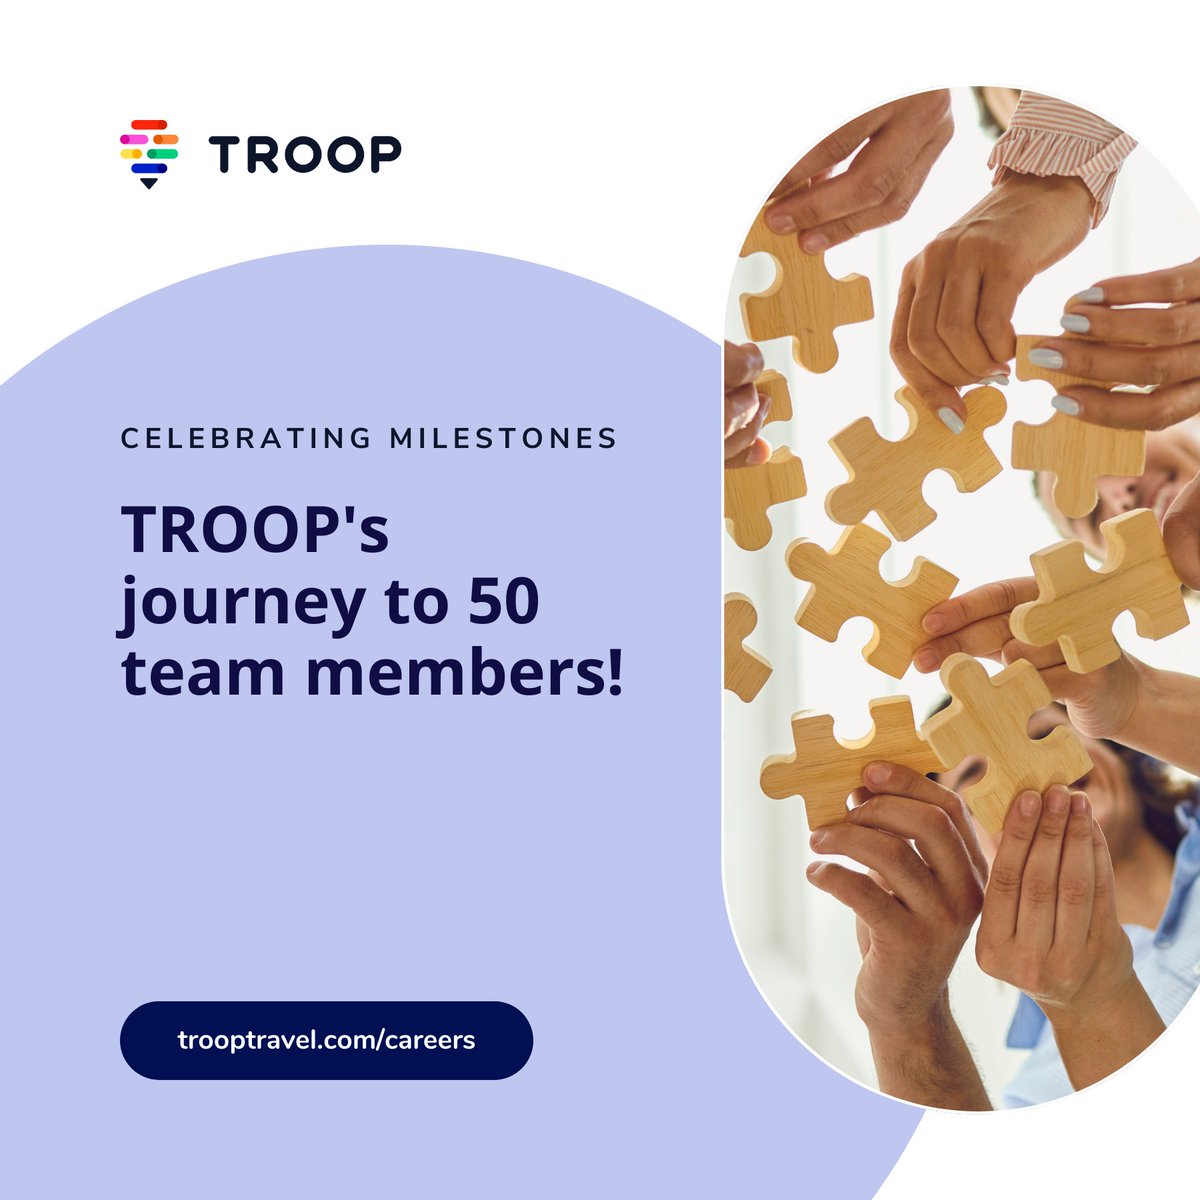 Celebrating a big milestone at TROOP - we're now a team of 50! Each member brings unique talents and a shared passion for reshaping corporate travel. Grateful for our clients, partners, and investors who've trusted us and fueled our growth. Onward to more innovation! #remotework